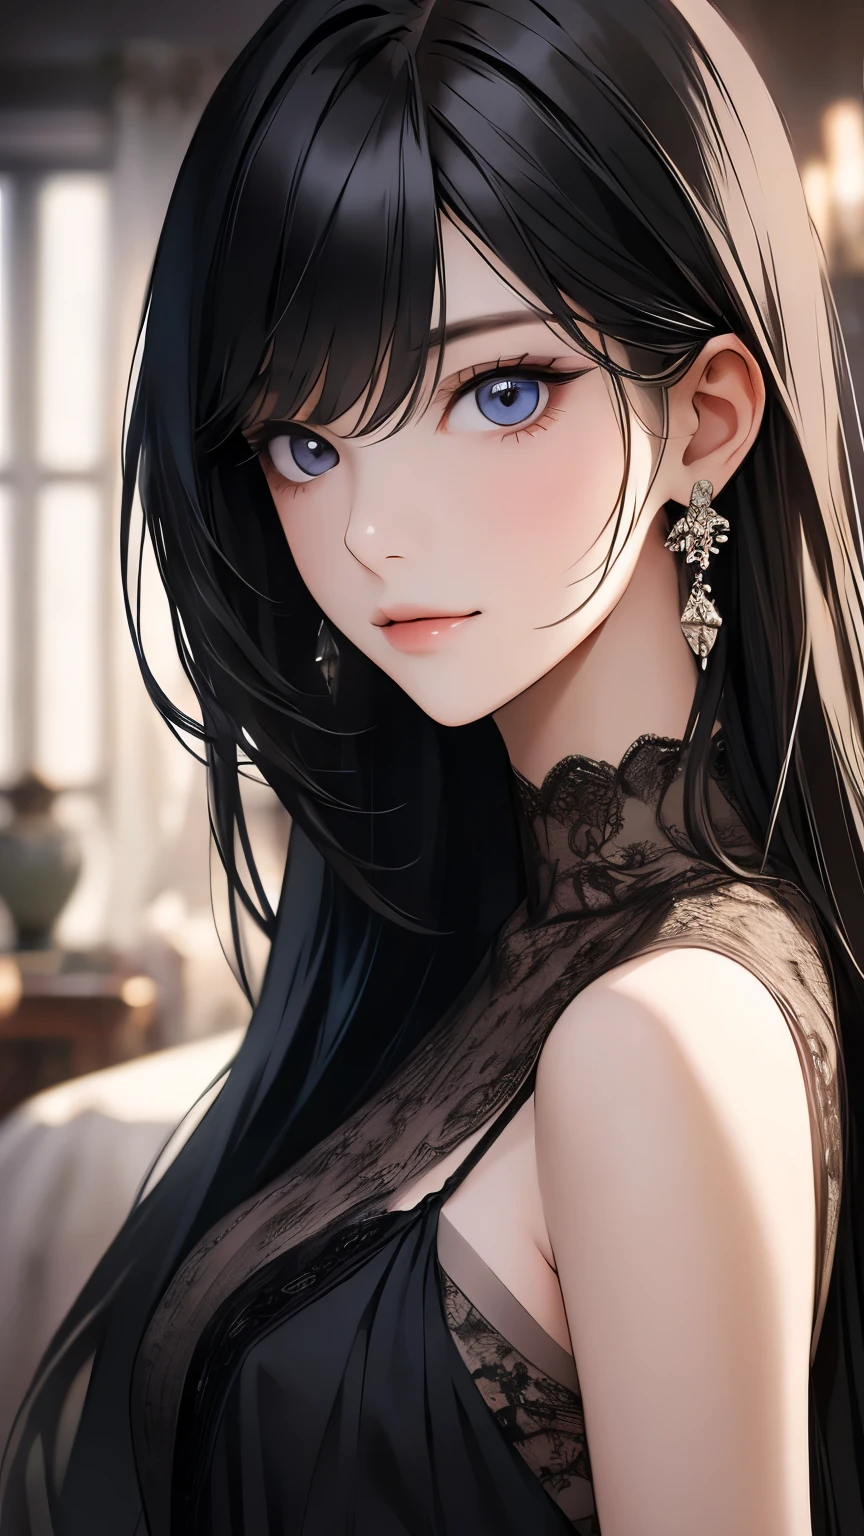 (surreal), (figure), (Improved resolution), (8K), (very detailed), (Best figure), (beautiful and detailed eyes), (highest quality), (super detailed), (masterpiece ), ( wallpaper), (detailed face), alone, 1 girl, looking at the viewer, small details, detailed face, in the dark, deep shadow, discreet key, Pure erotic face ace_V1, smile, long hair, black shawl straight hair , 46 point diagonal bangs